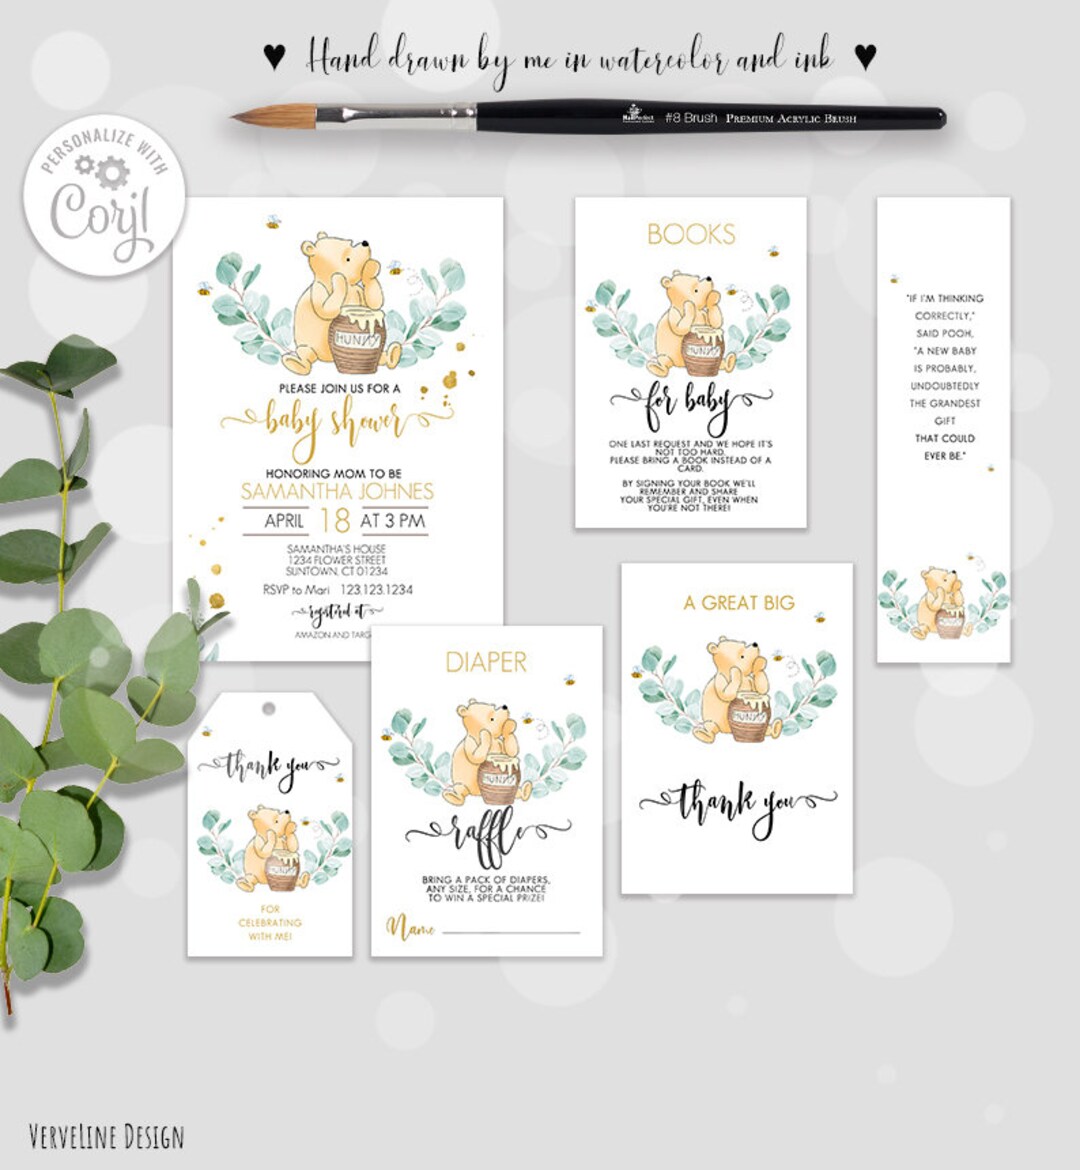 Classic Winnie the Pooh Baby Shower Bingo Game 25 Cards - Custom Party  Creations